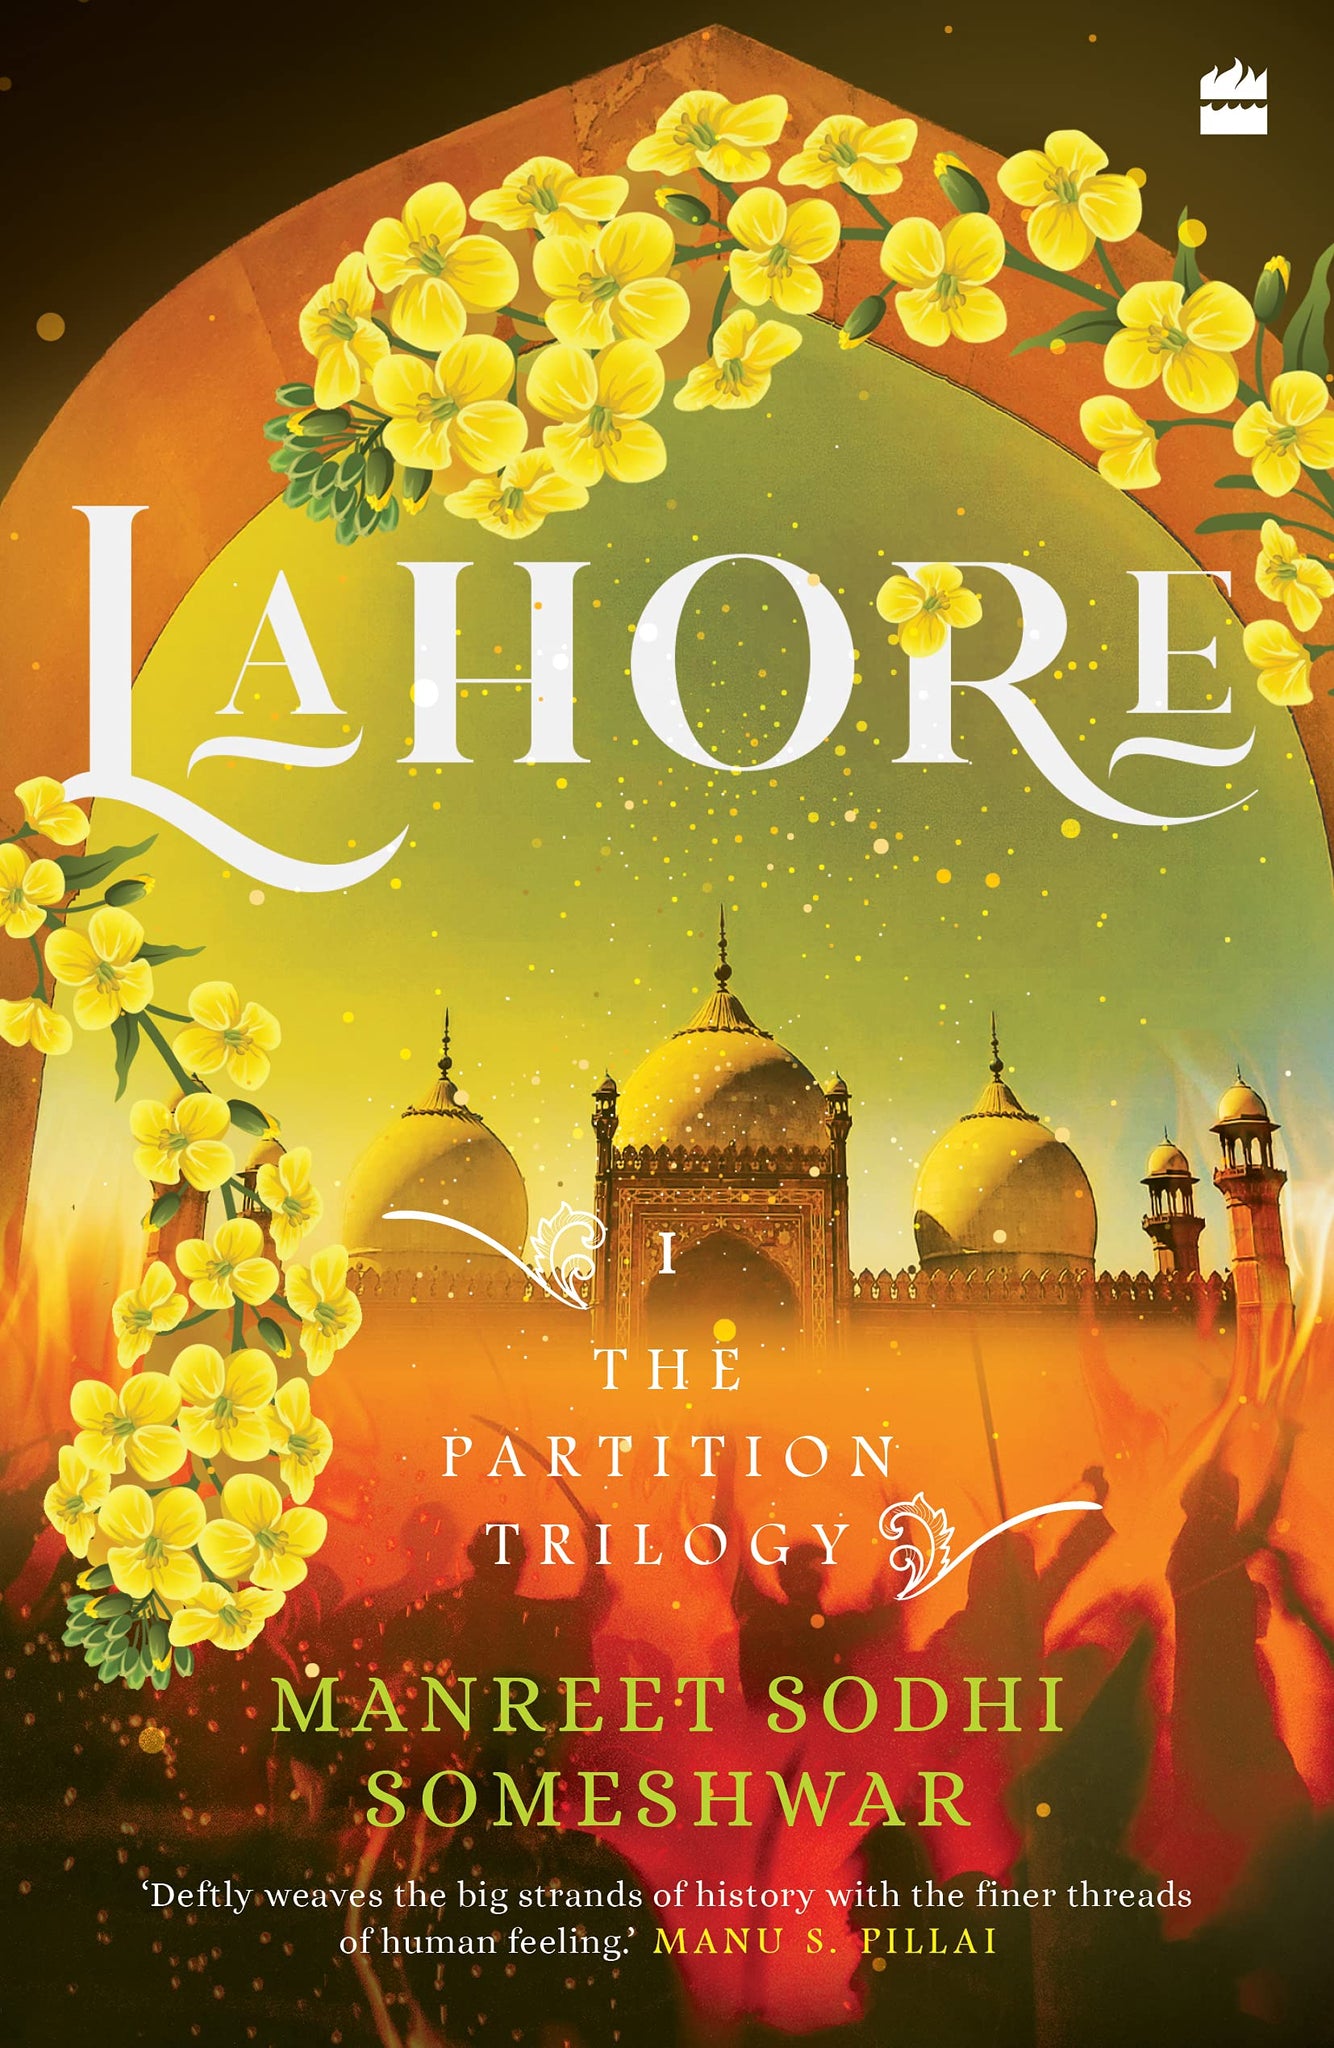 Lahore: 1 of The Partition Trilogy